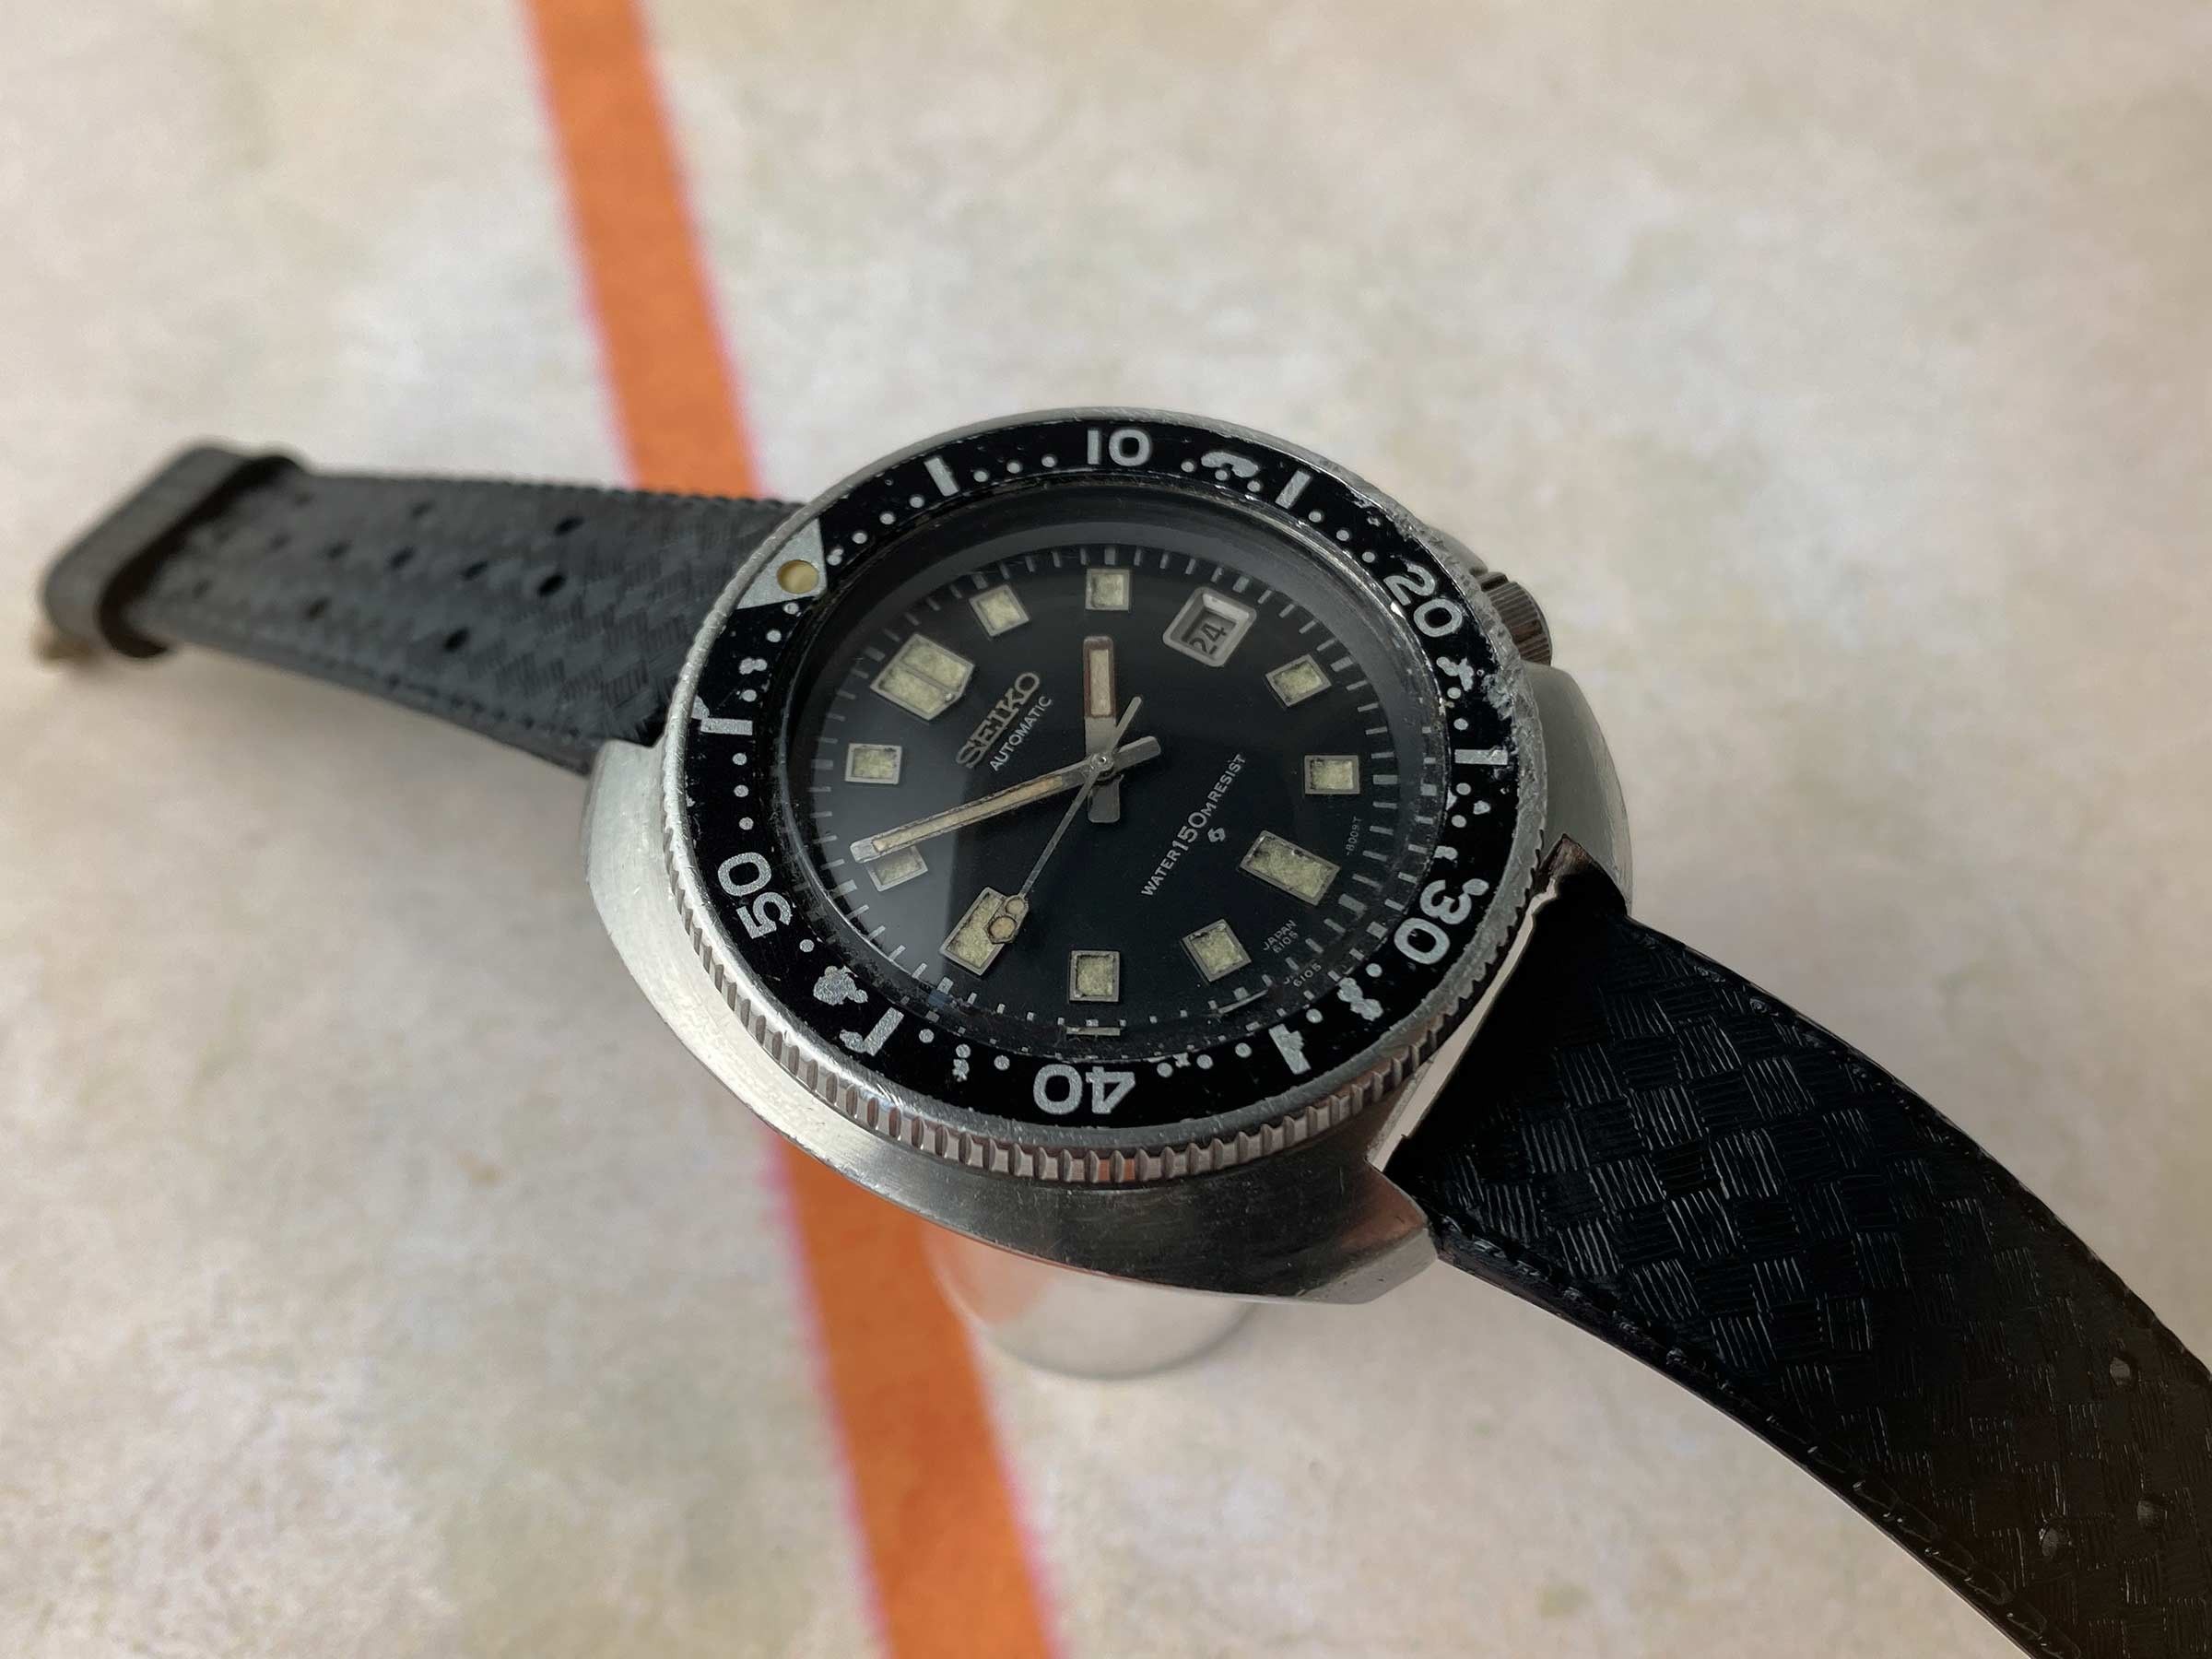 Seiko] My Dad Gifted Me His Seiko 6105 Diver, Which He Purchased At Lowry  AFB In 1969 While Attending Intelligence He Wore It In Vietnam While  Stationed At 7th Air Force |